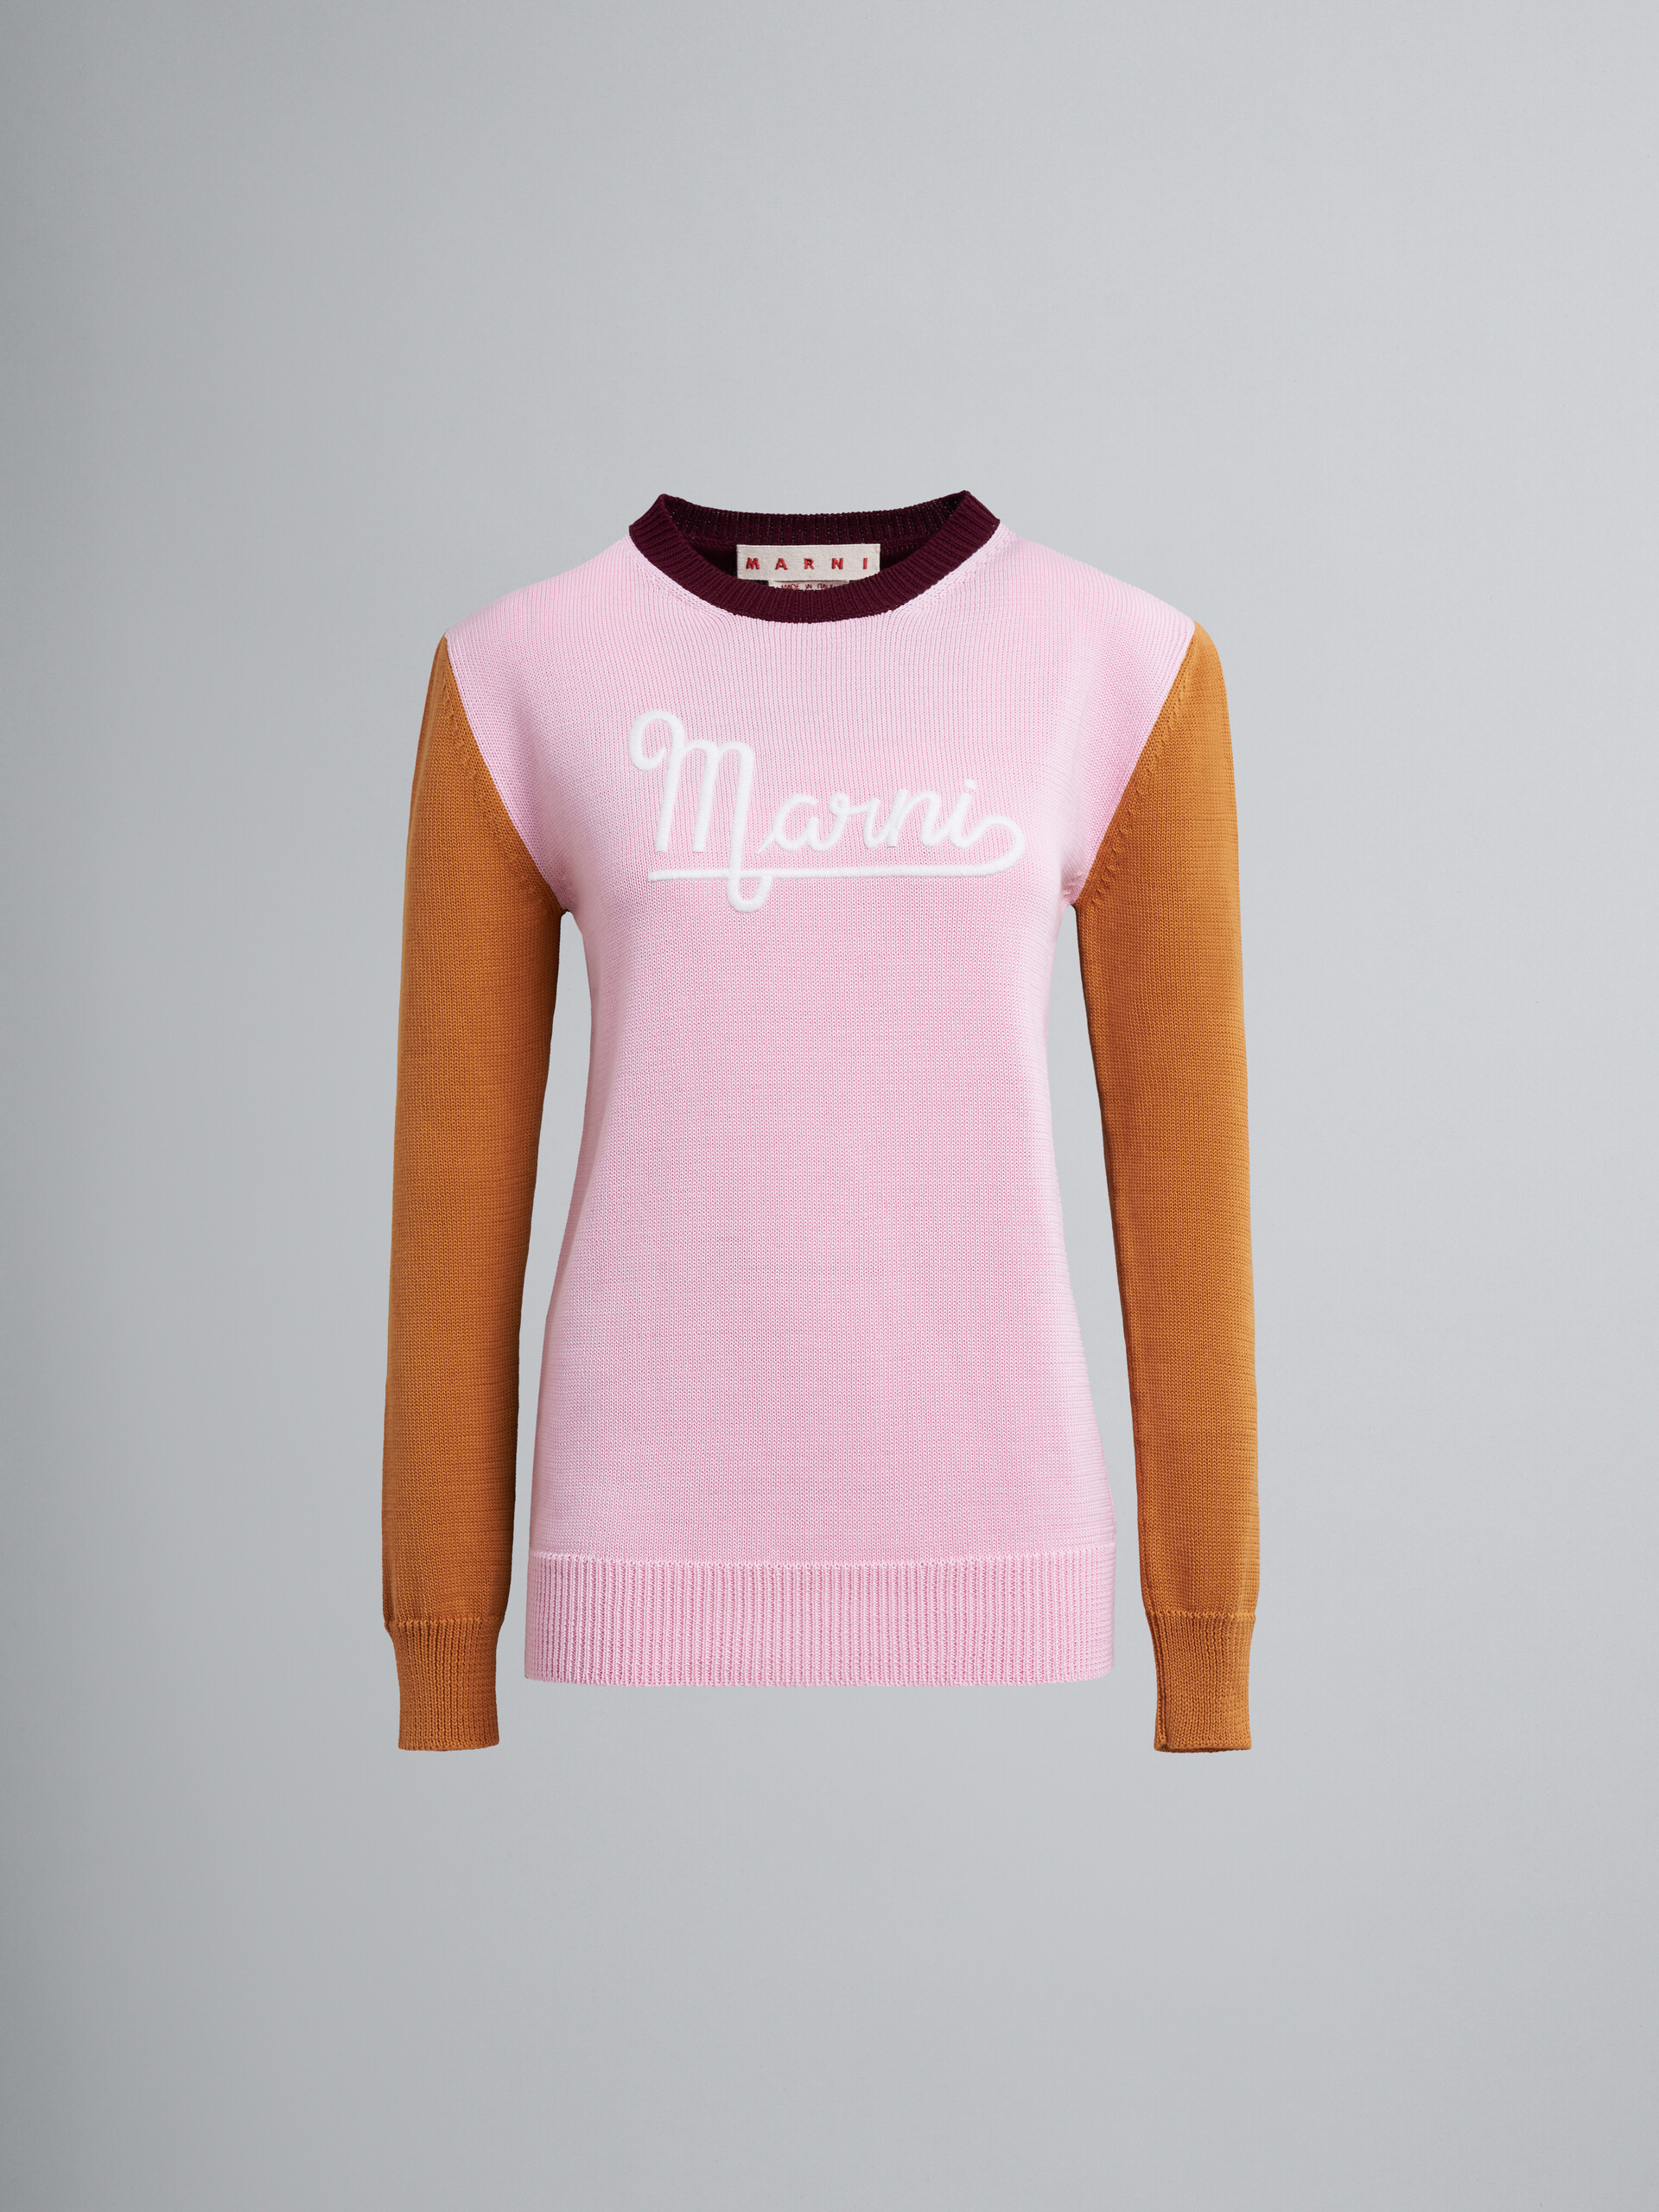 Long-sleeved logo organic cotton sweater - Pullovers - Image 1